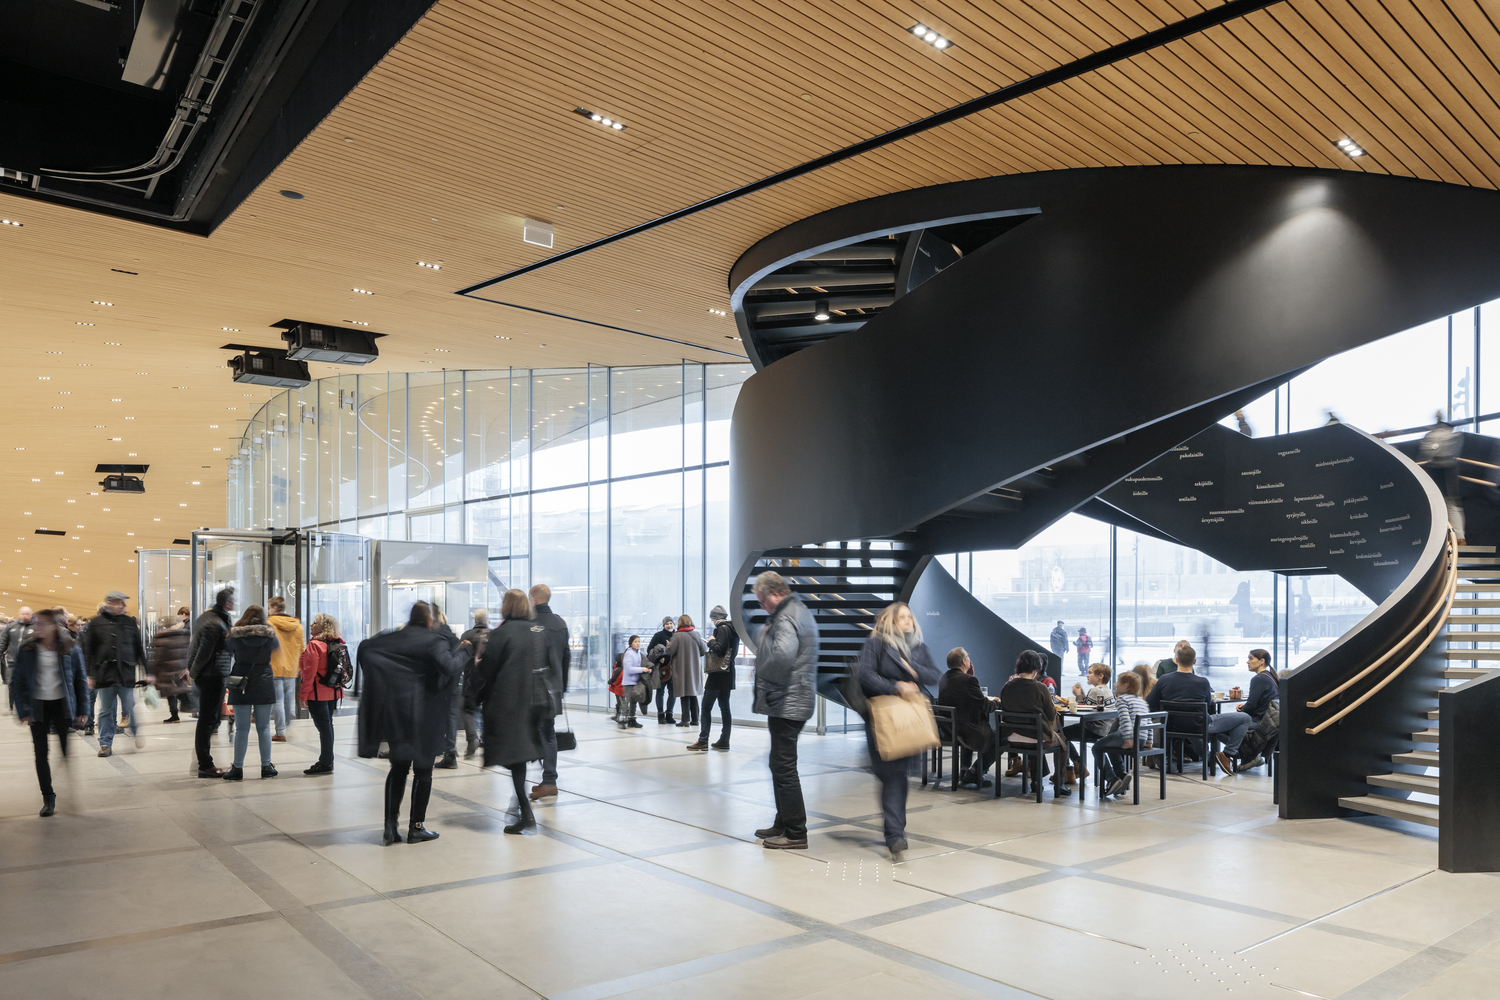 Not Just For Bookworms: Helsinki’s Oodi Central Library Connects Residents Through Multi-Faceted Cultural Resources